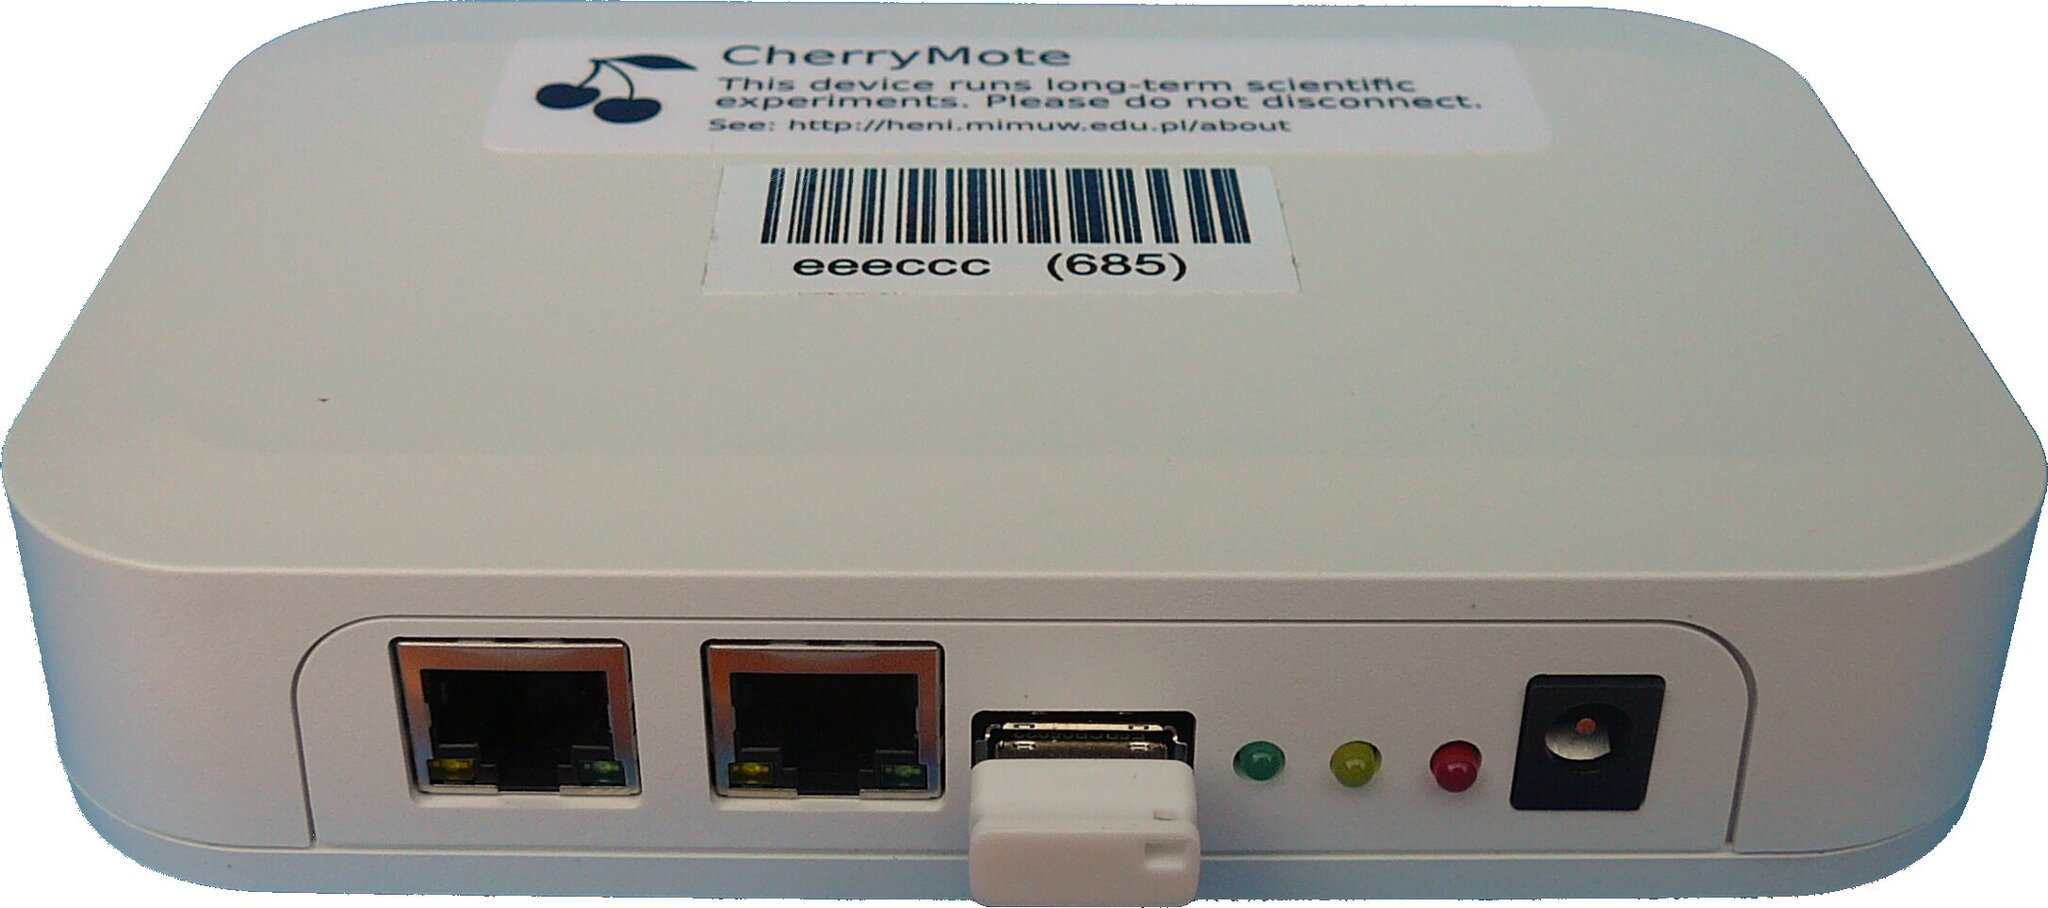 A photo of CherryMote. It is a small white box with Ethernet ports, a USB port, LEDs and a power supply port in the front panel.